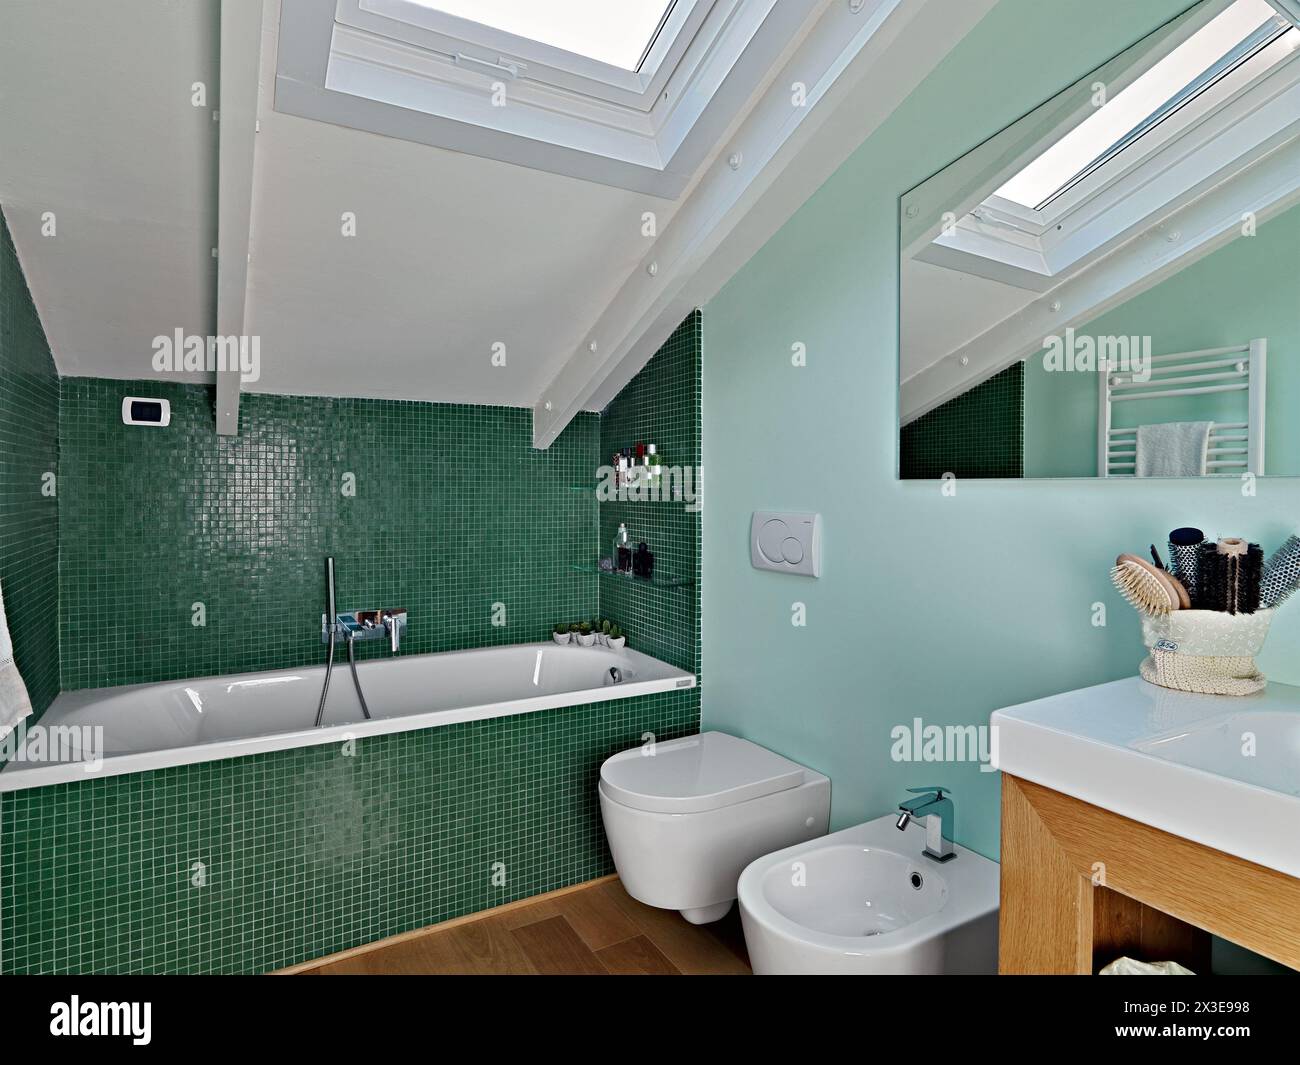 interior view of a modern bathroom in the attic room in the aforegorund there is a bathtub and the sanitary ware Stock Photo